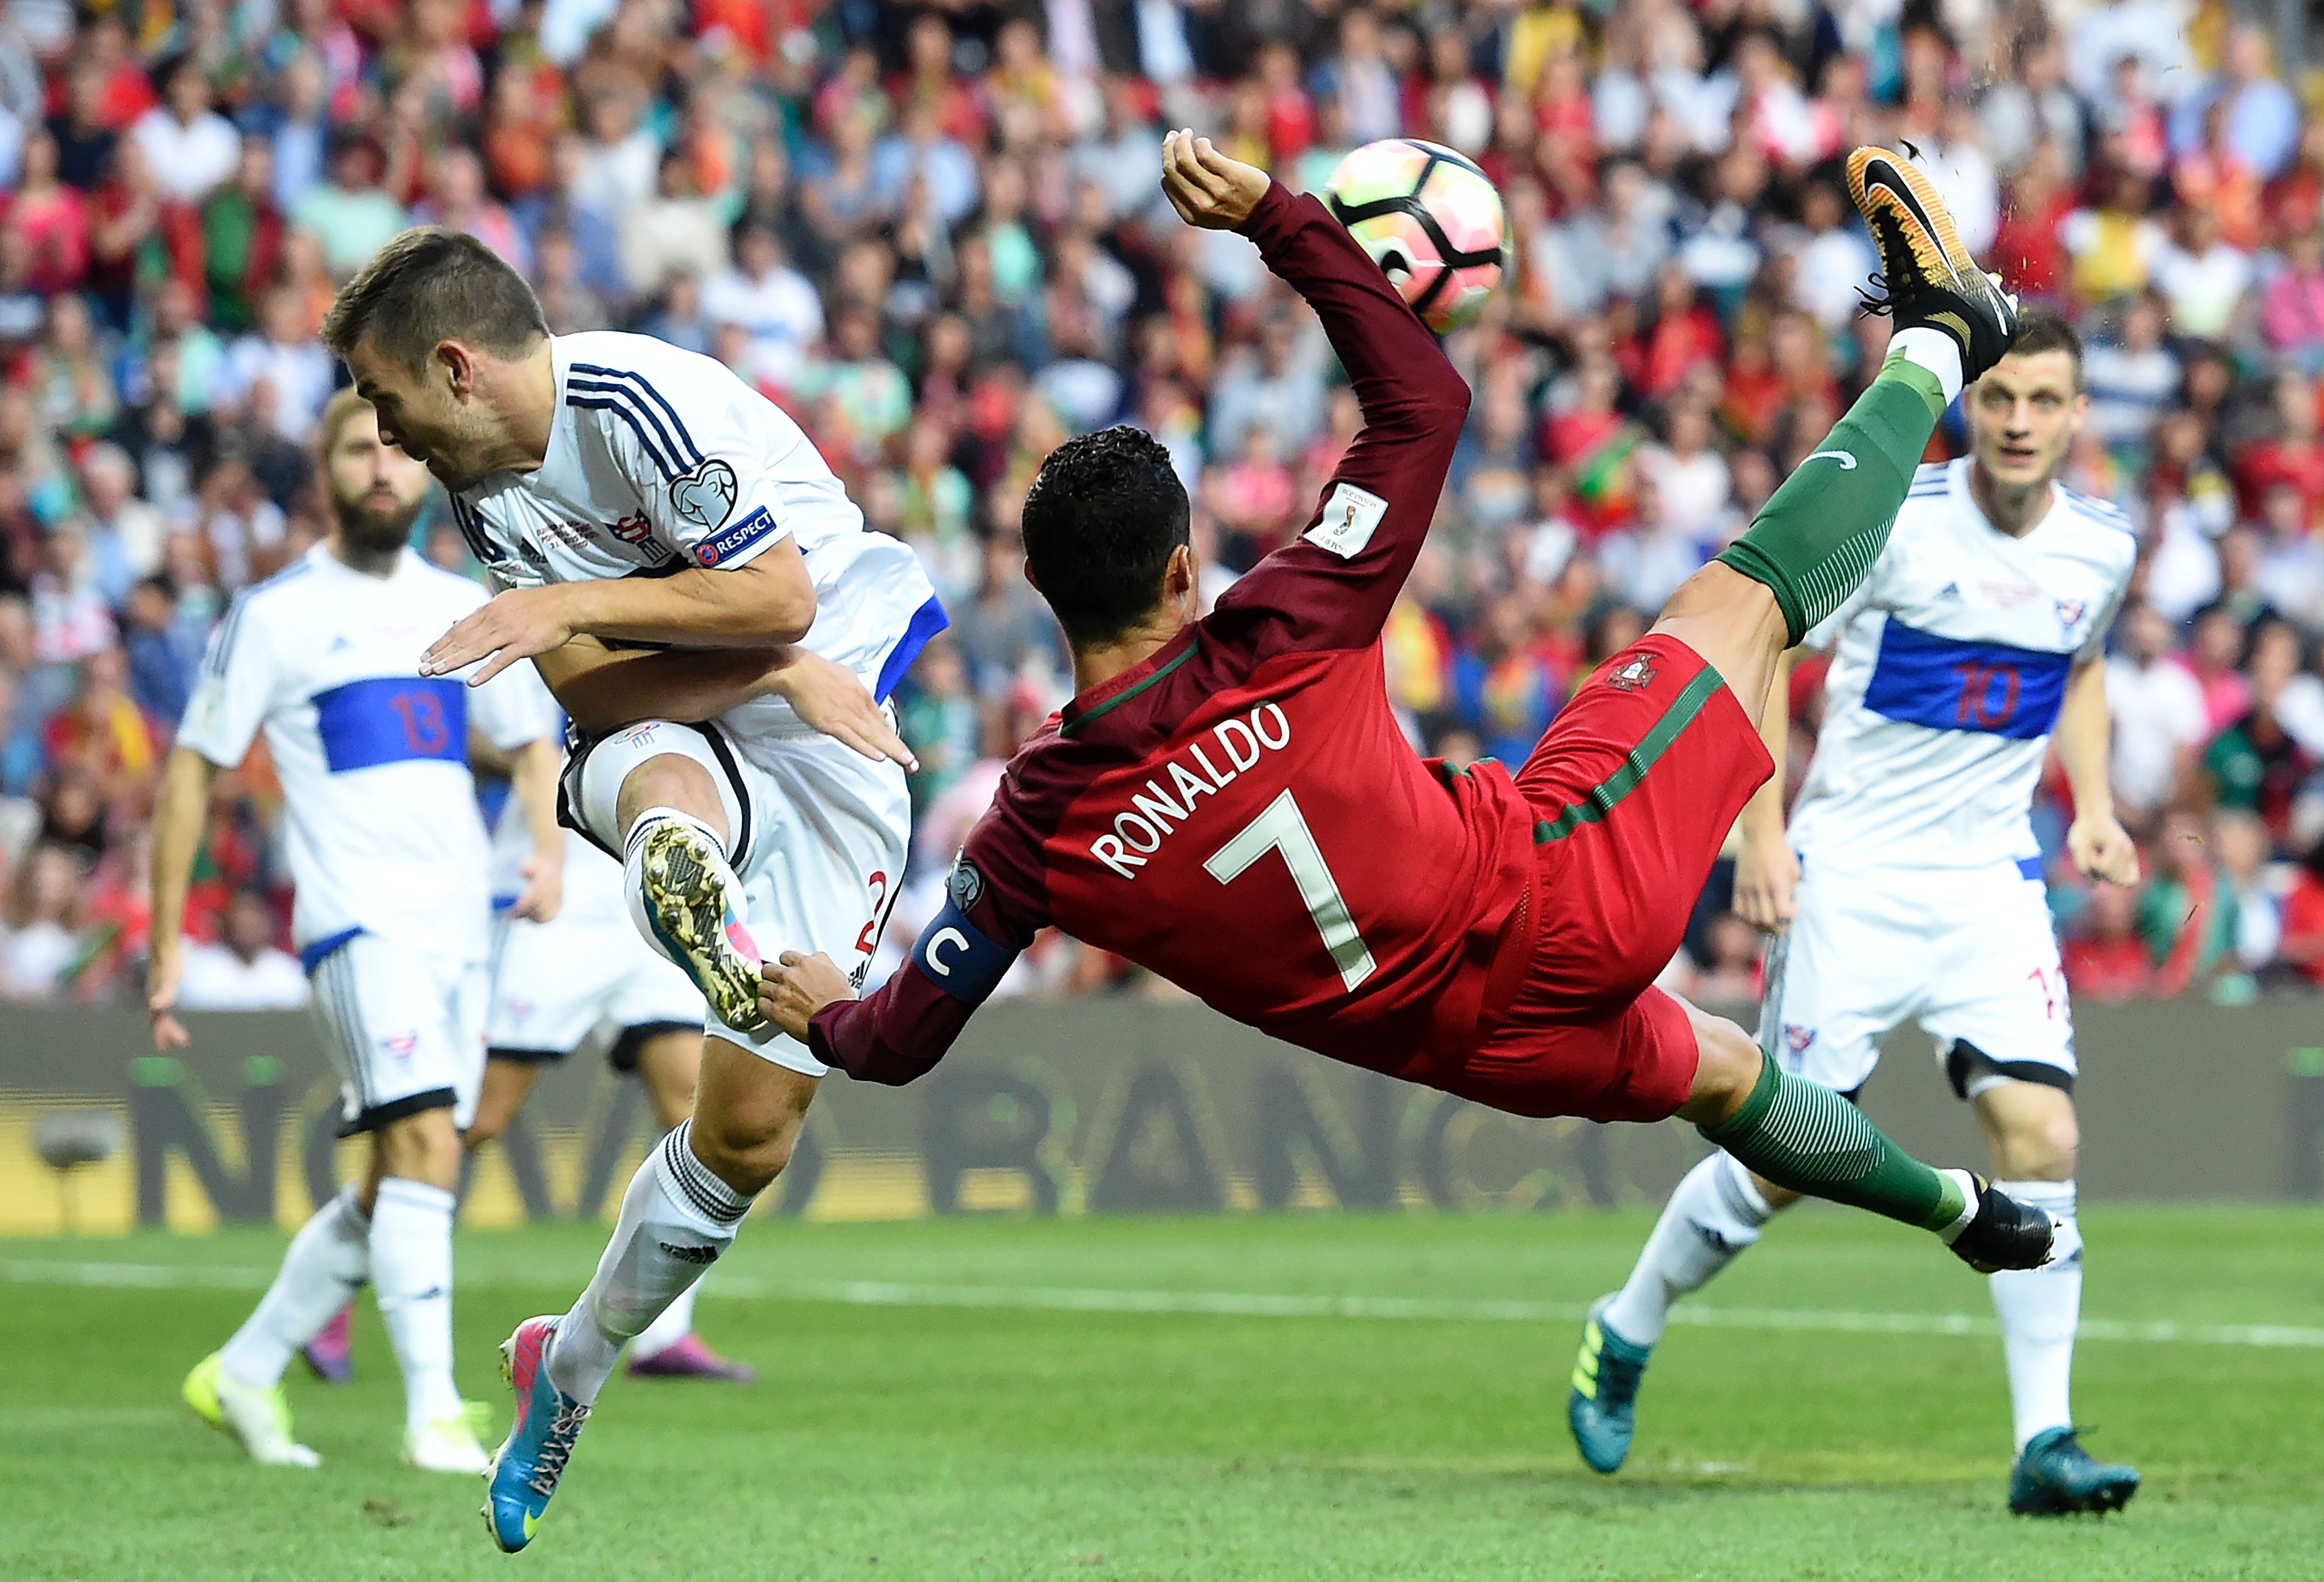 Portugal's forward Cristiano Ronaldo (C) kicks the ball to score the opening goal during the WC2018 qualifying football match Portugal vs Faroe Islands at the Bessa stadium in Porto on August 31, 2017. / AFP PHOTO / FRANCISCO LEONG        (Photo credit should read FRANCISCO LEONG/AFP/Getty Images)